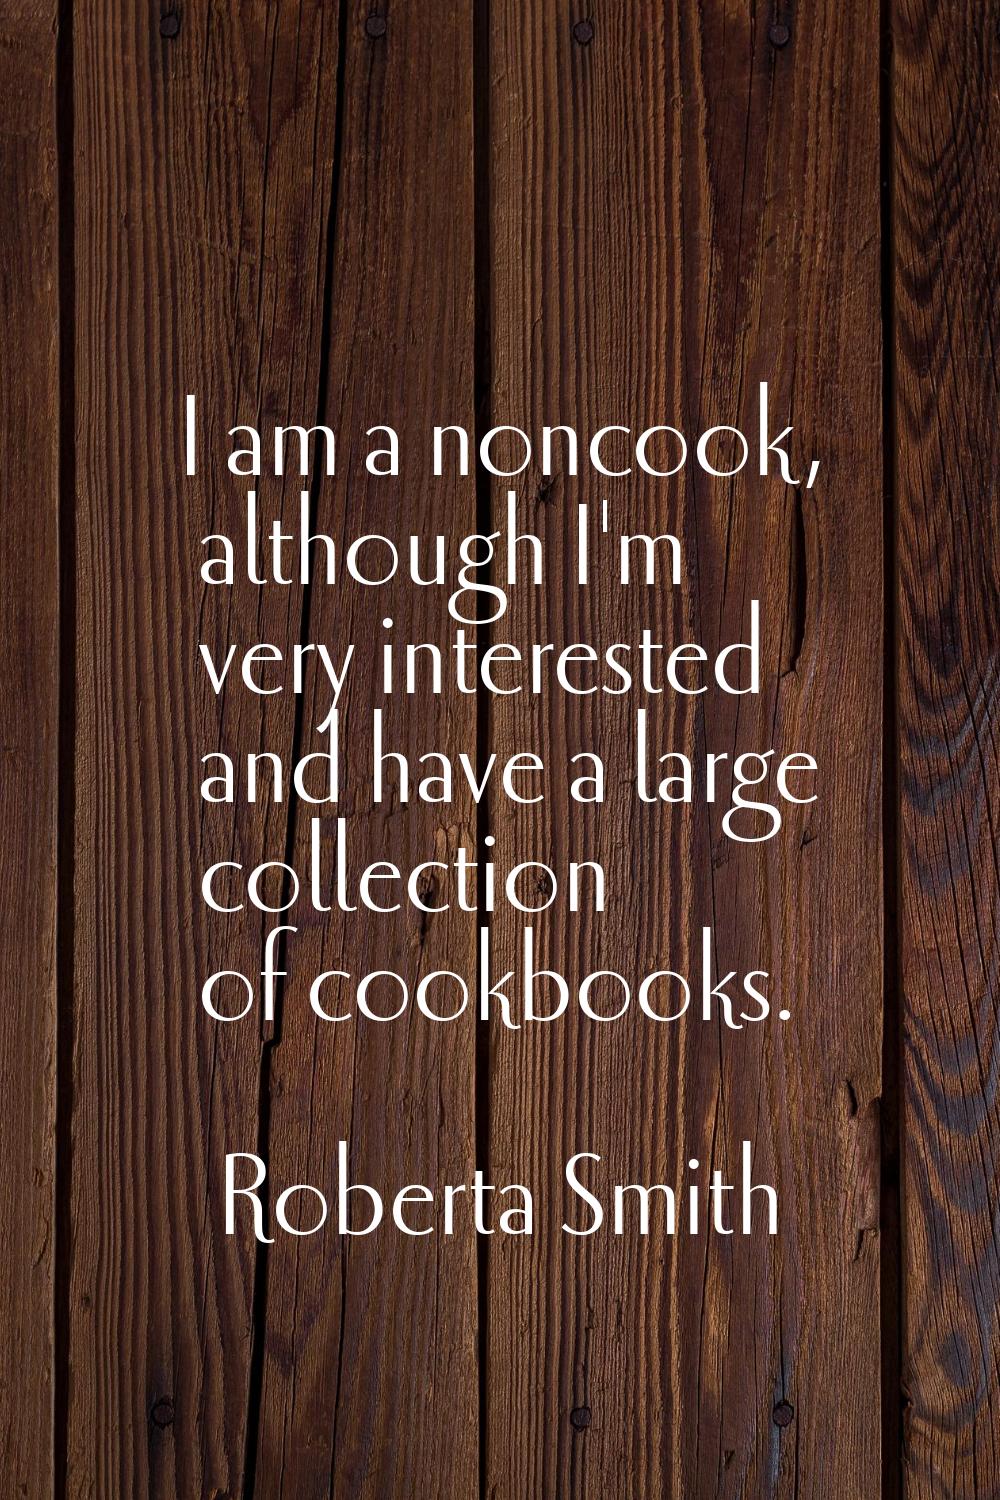 I am a noncook, although I'm very interested and have a large collection of cookbooks.